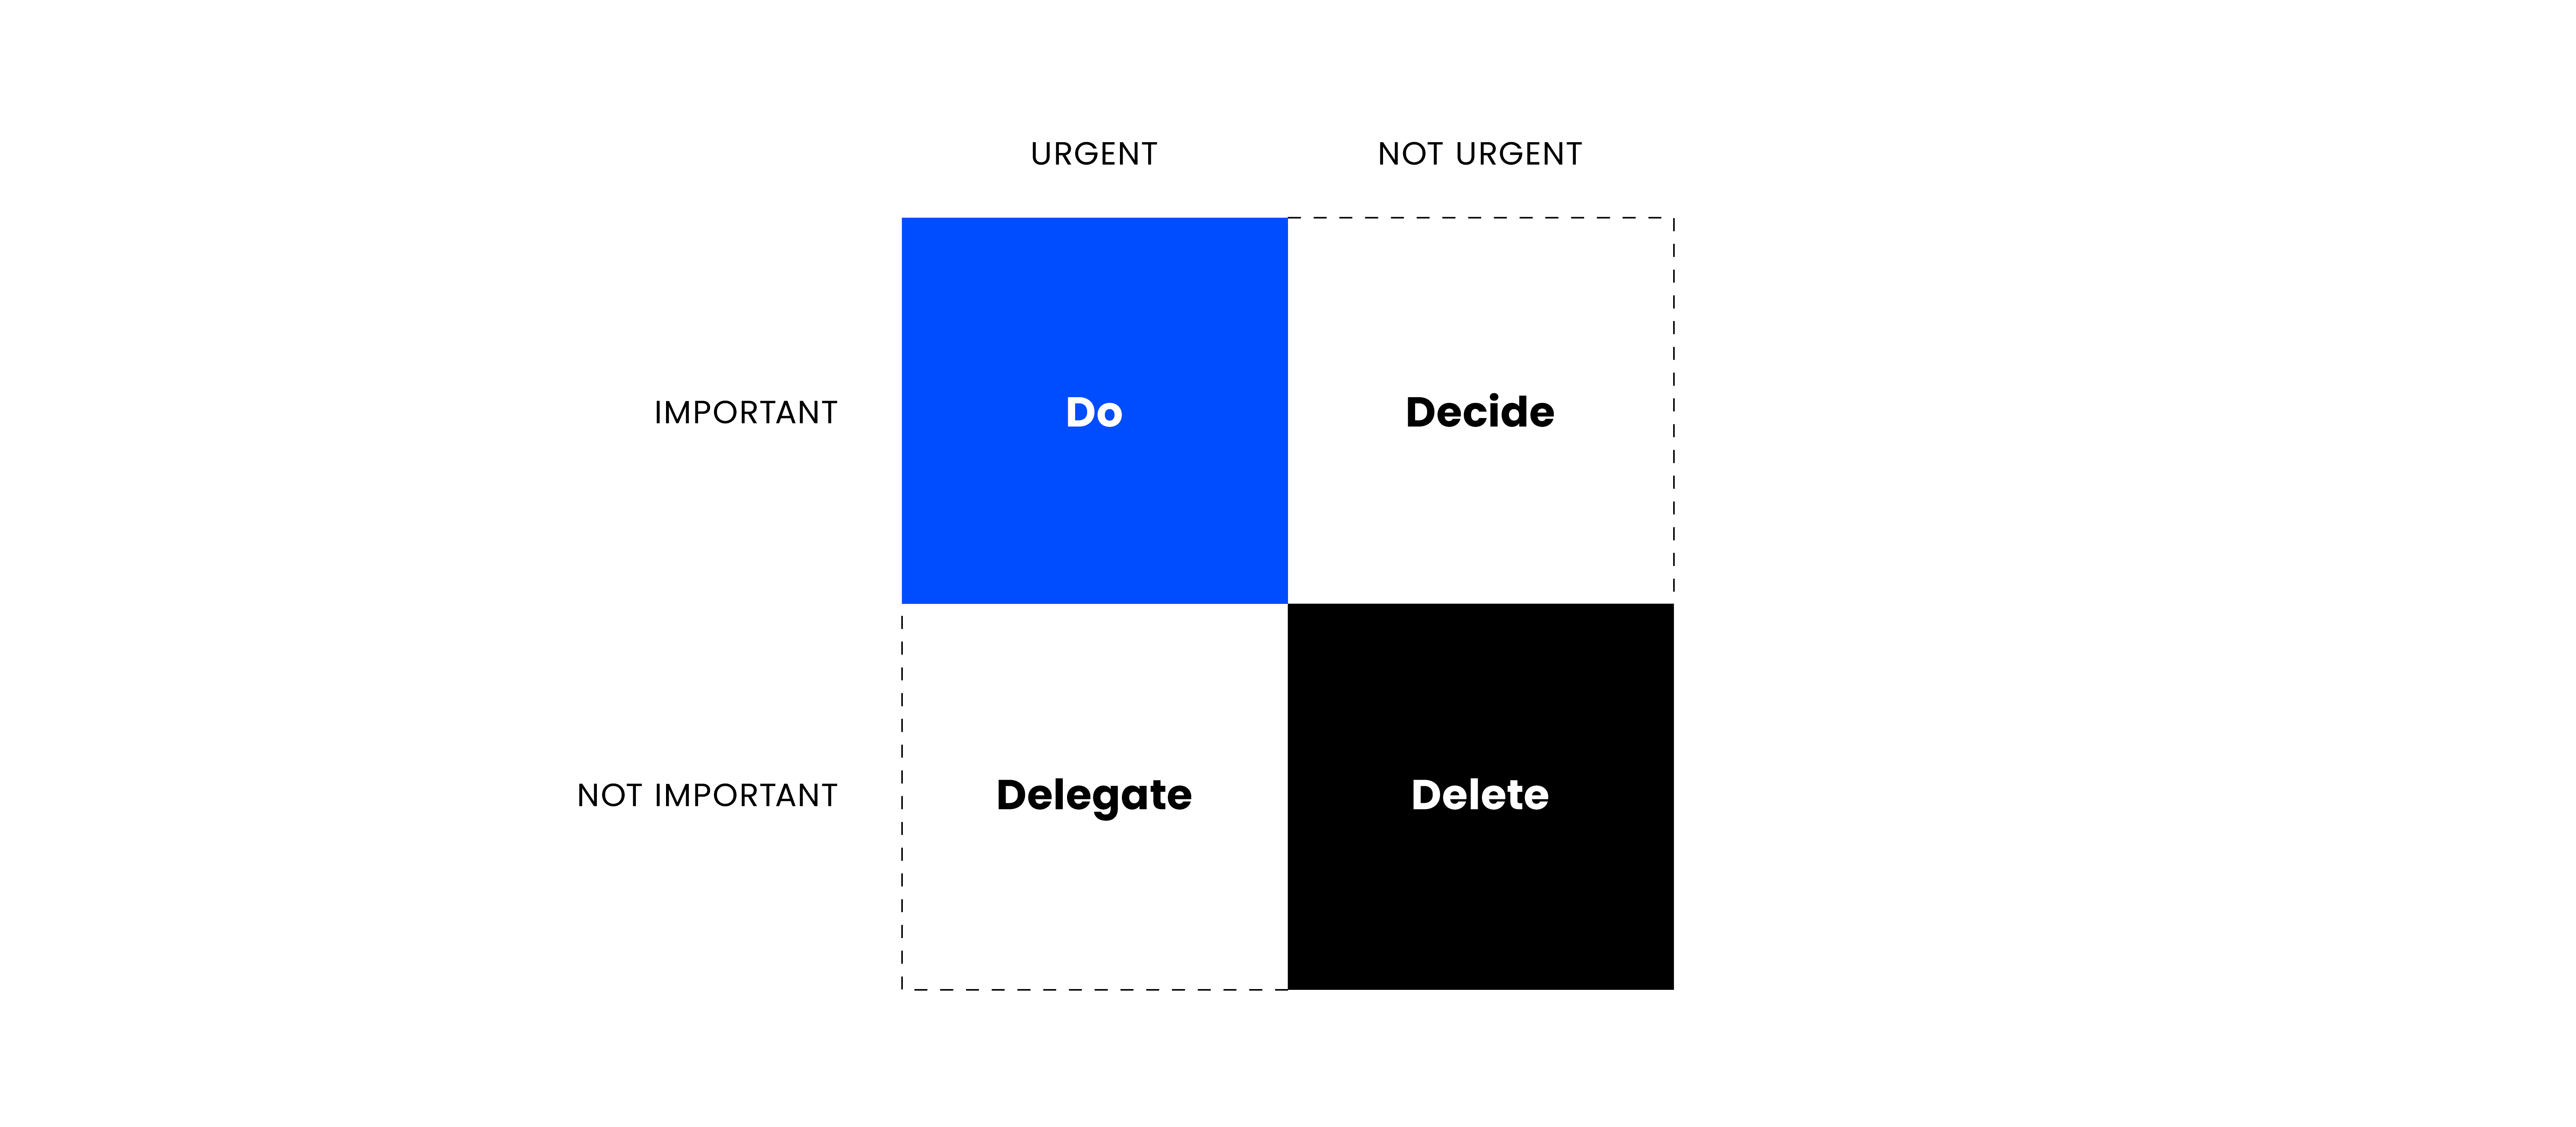 four squares with column labels urgent and not urgent and row labels important and not important. The squares are labelled do, decide, delegate, delete, clockwise from the top left.